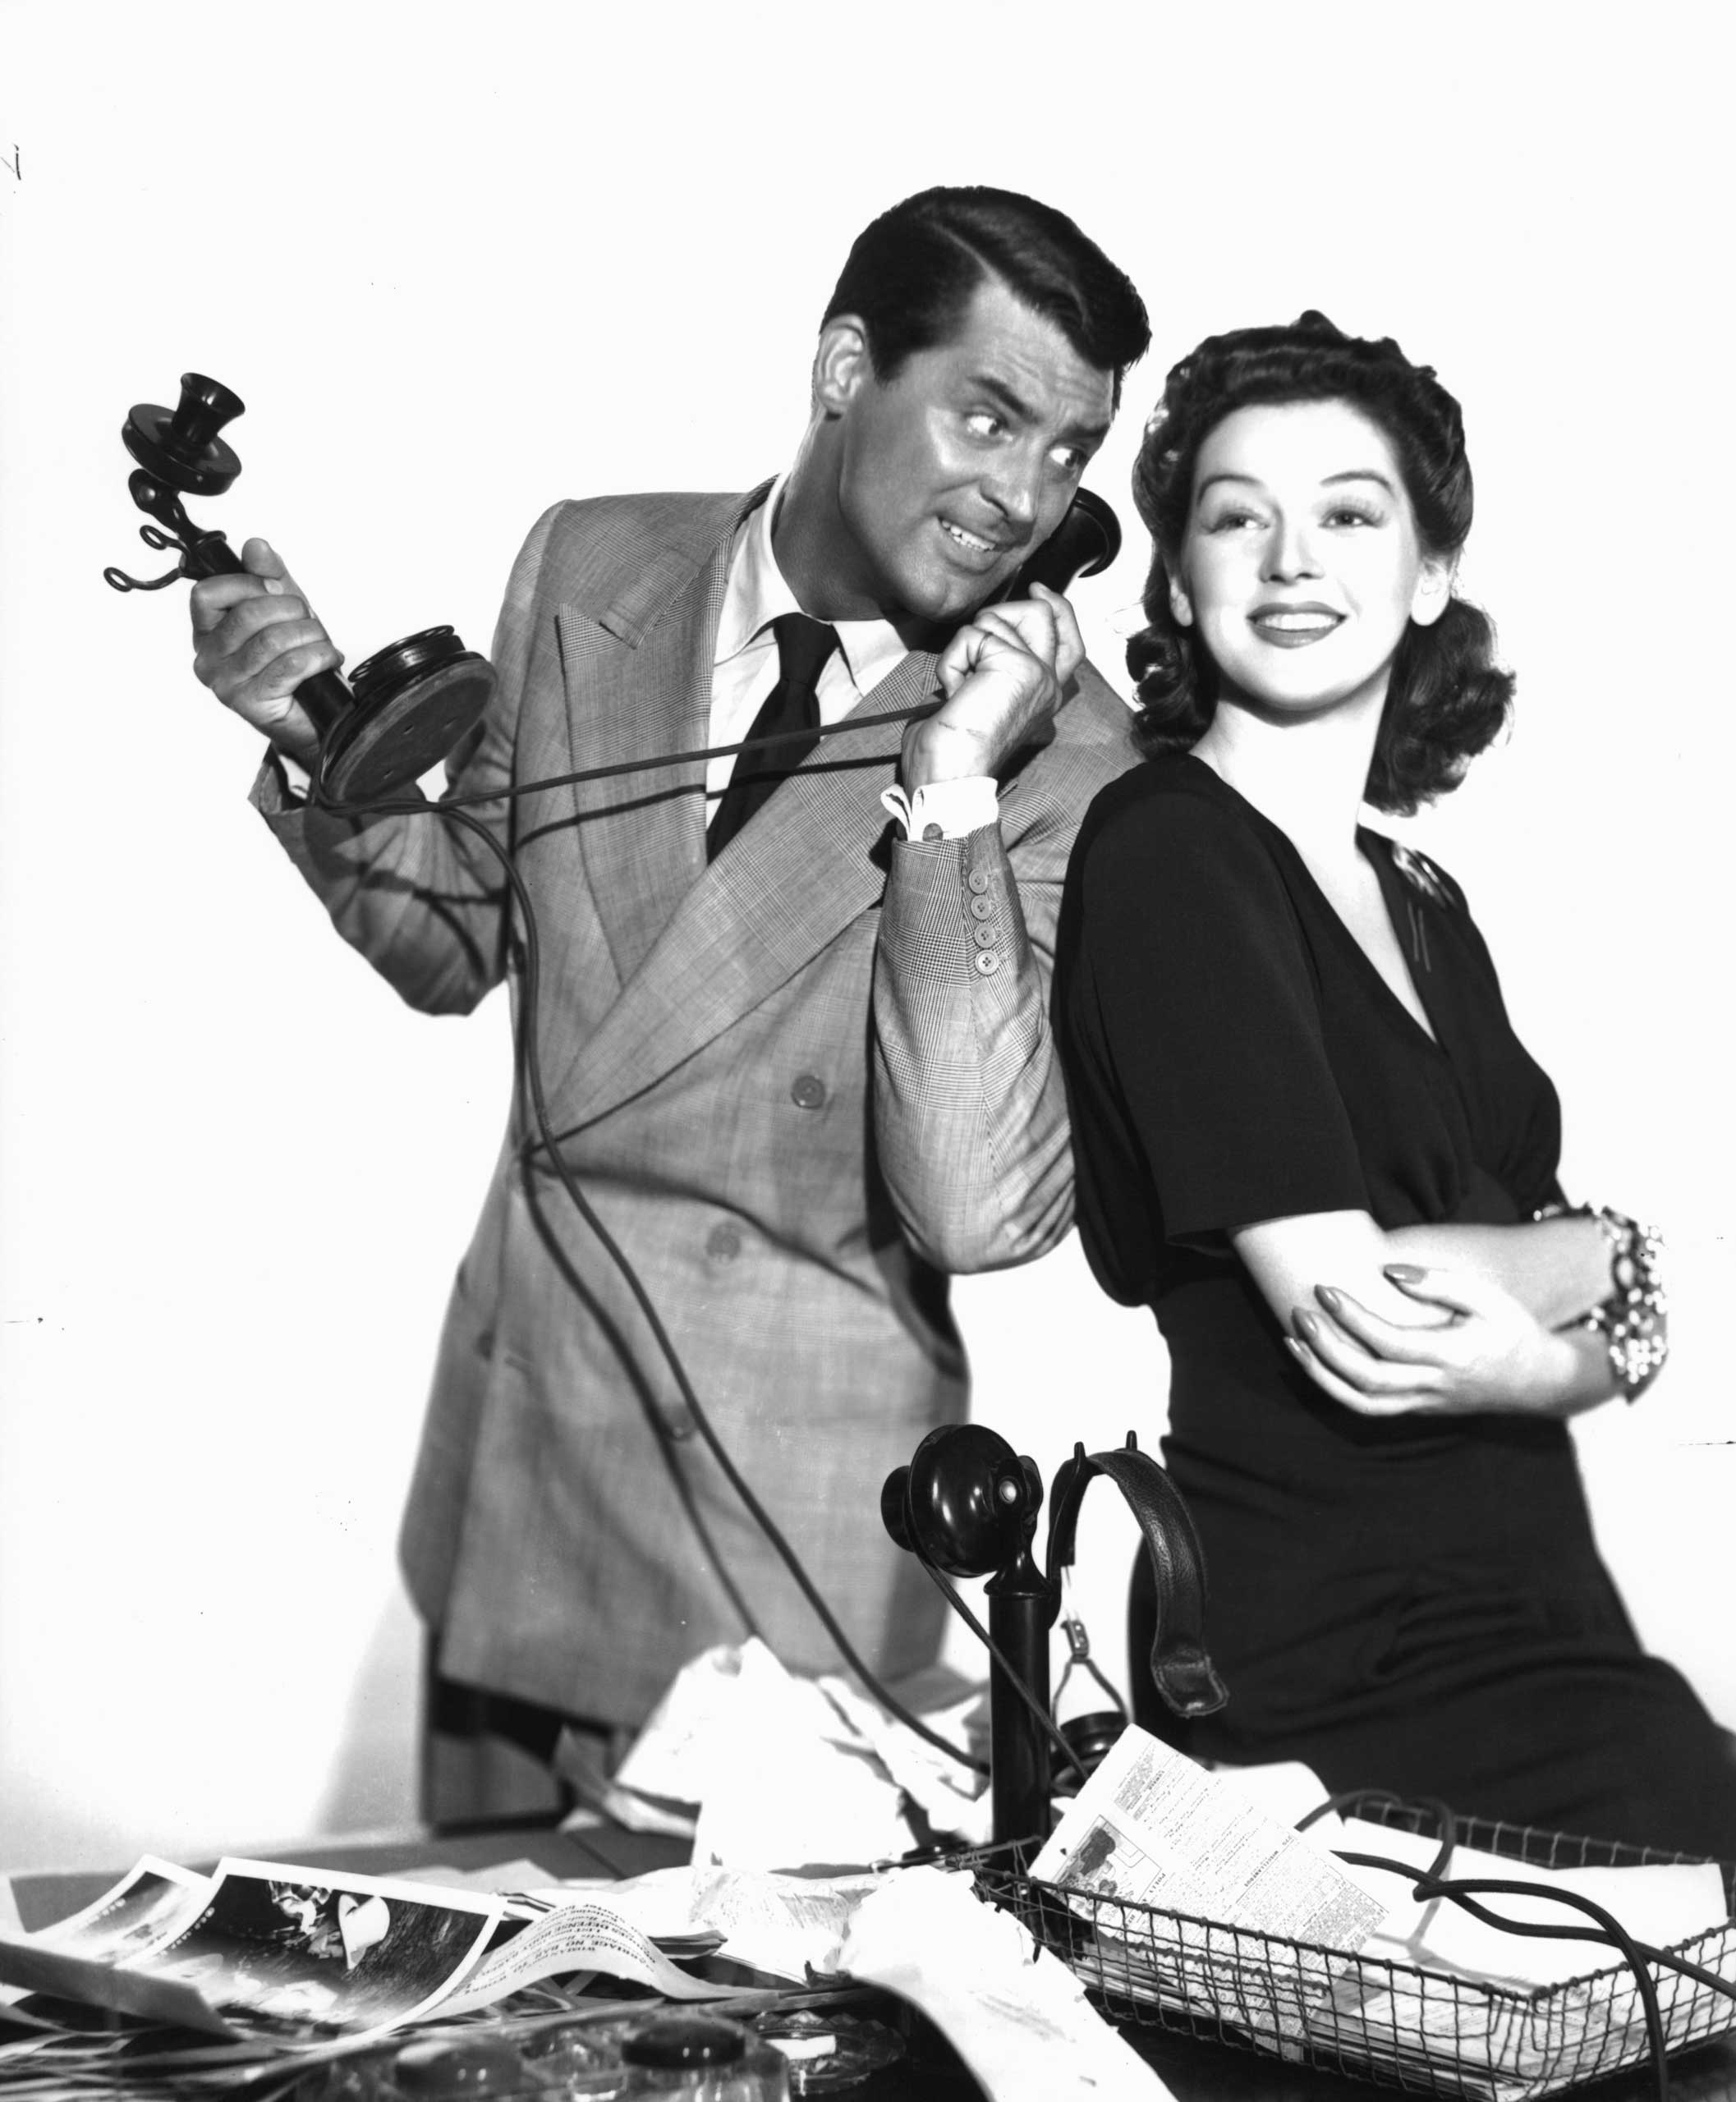 Cary Grant And Rosalind Russell In 'His Girl Friday'